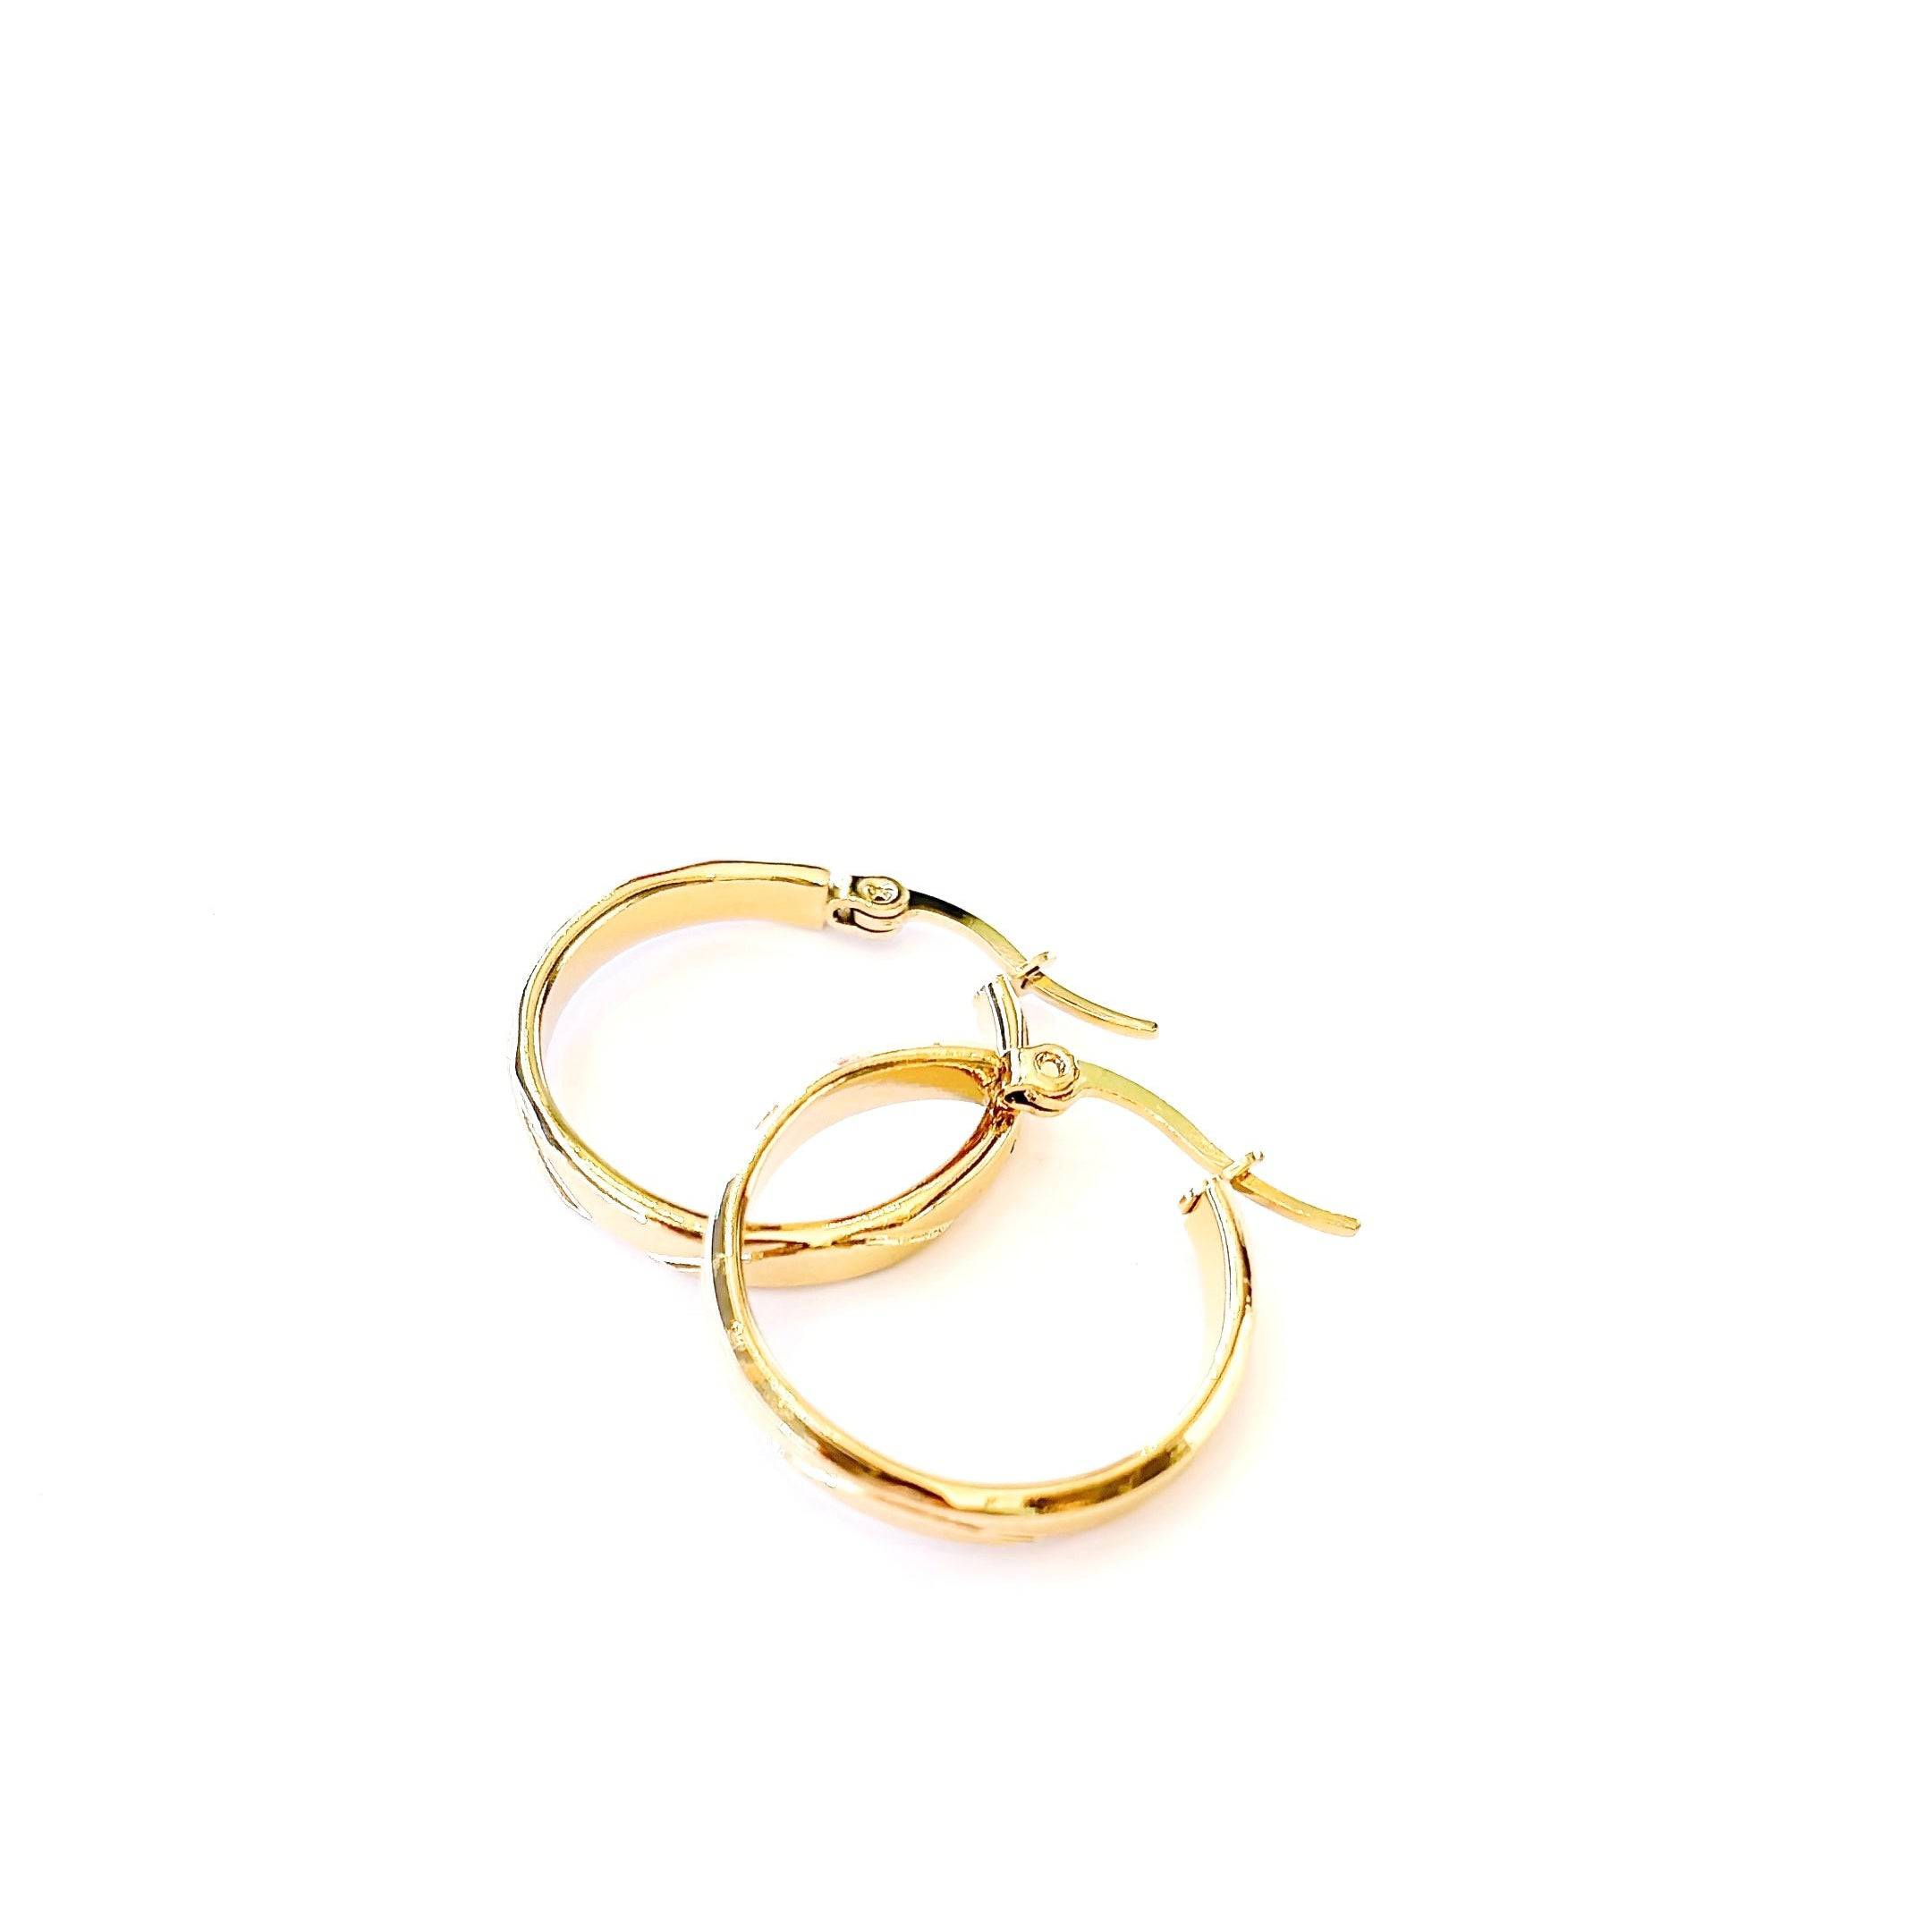 Simple Design Gold Hoop Earrings - Gottohaveitfashion